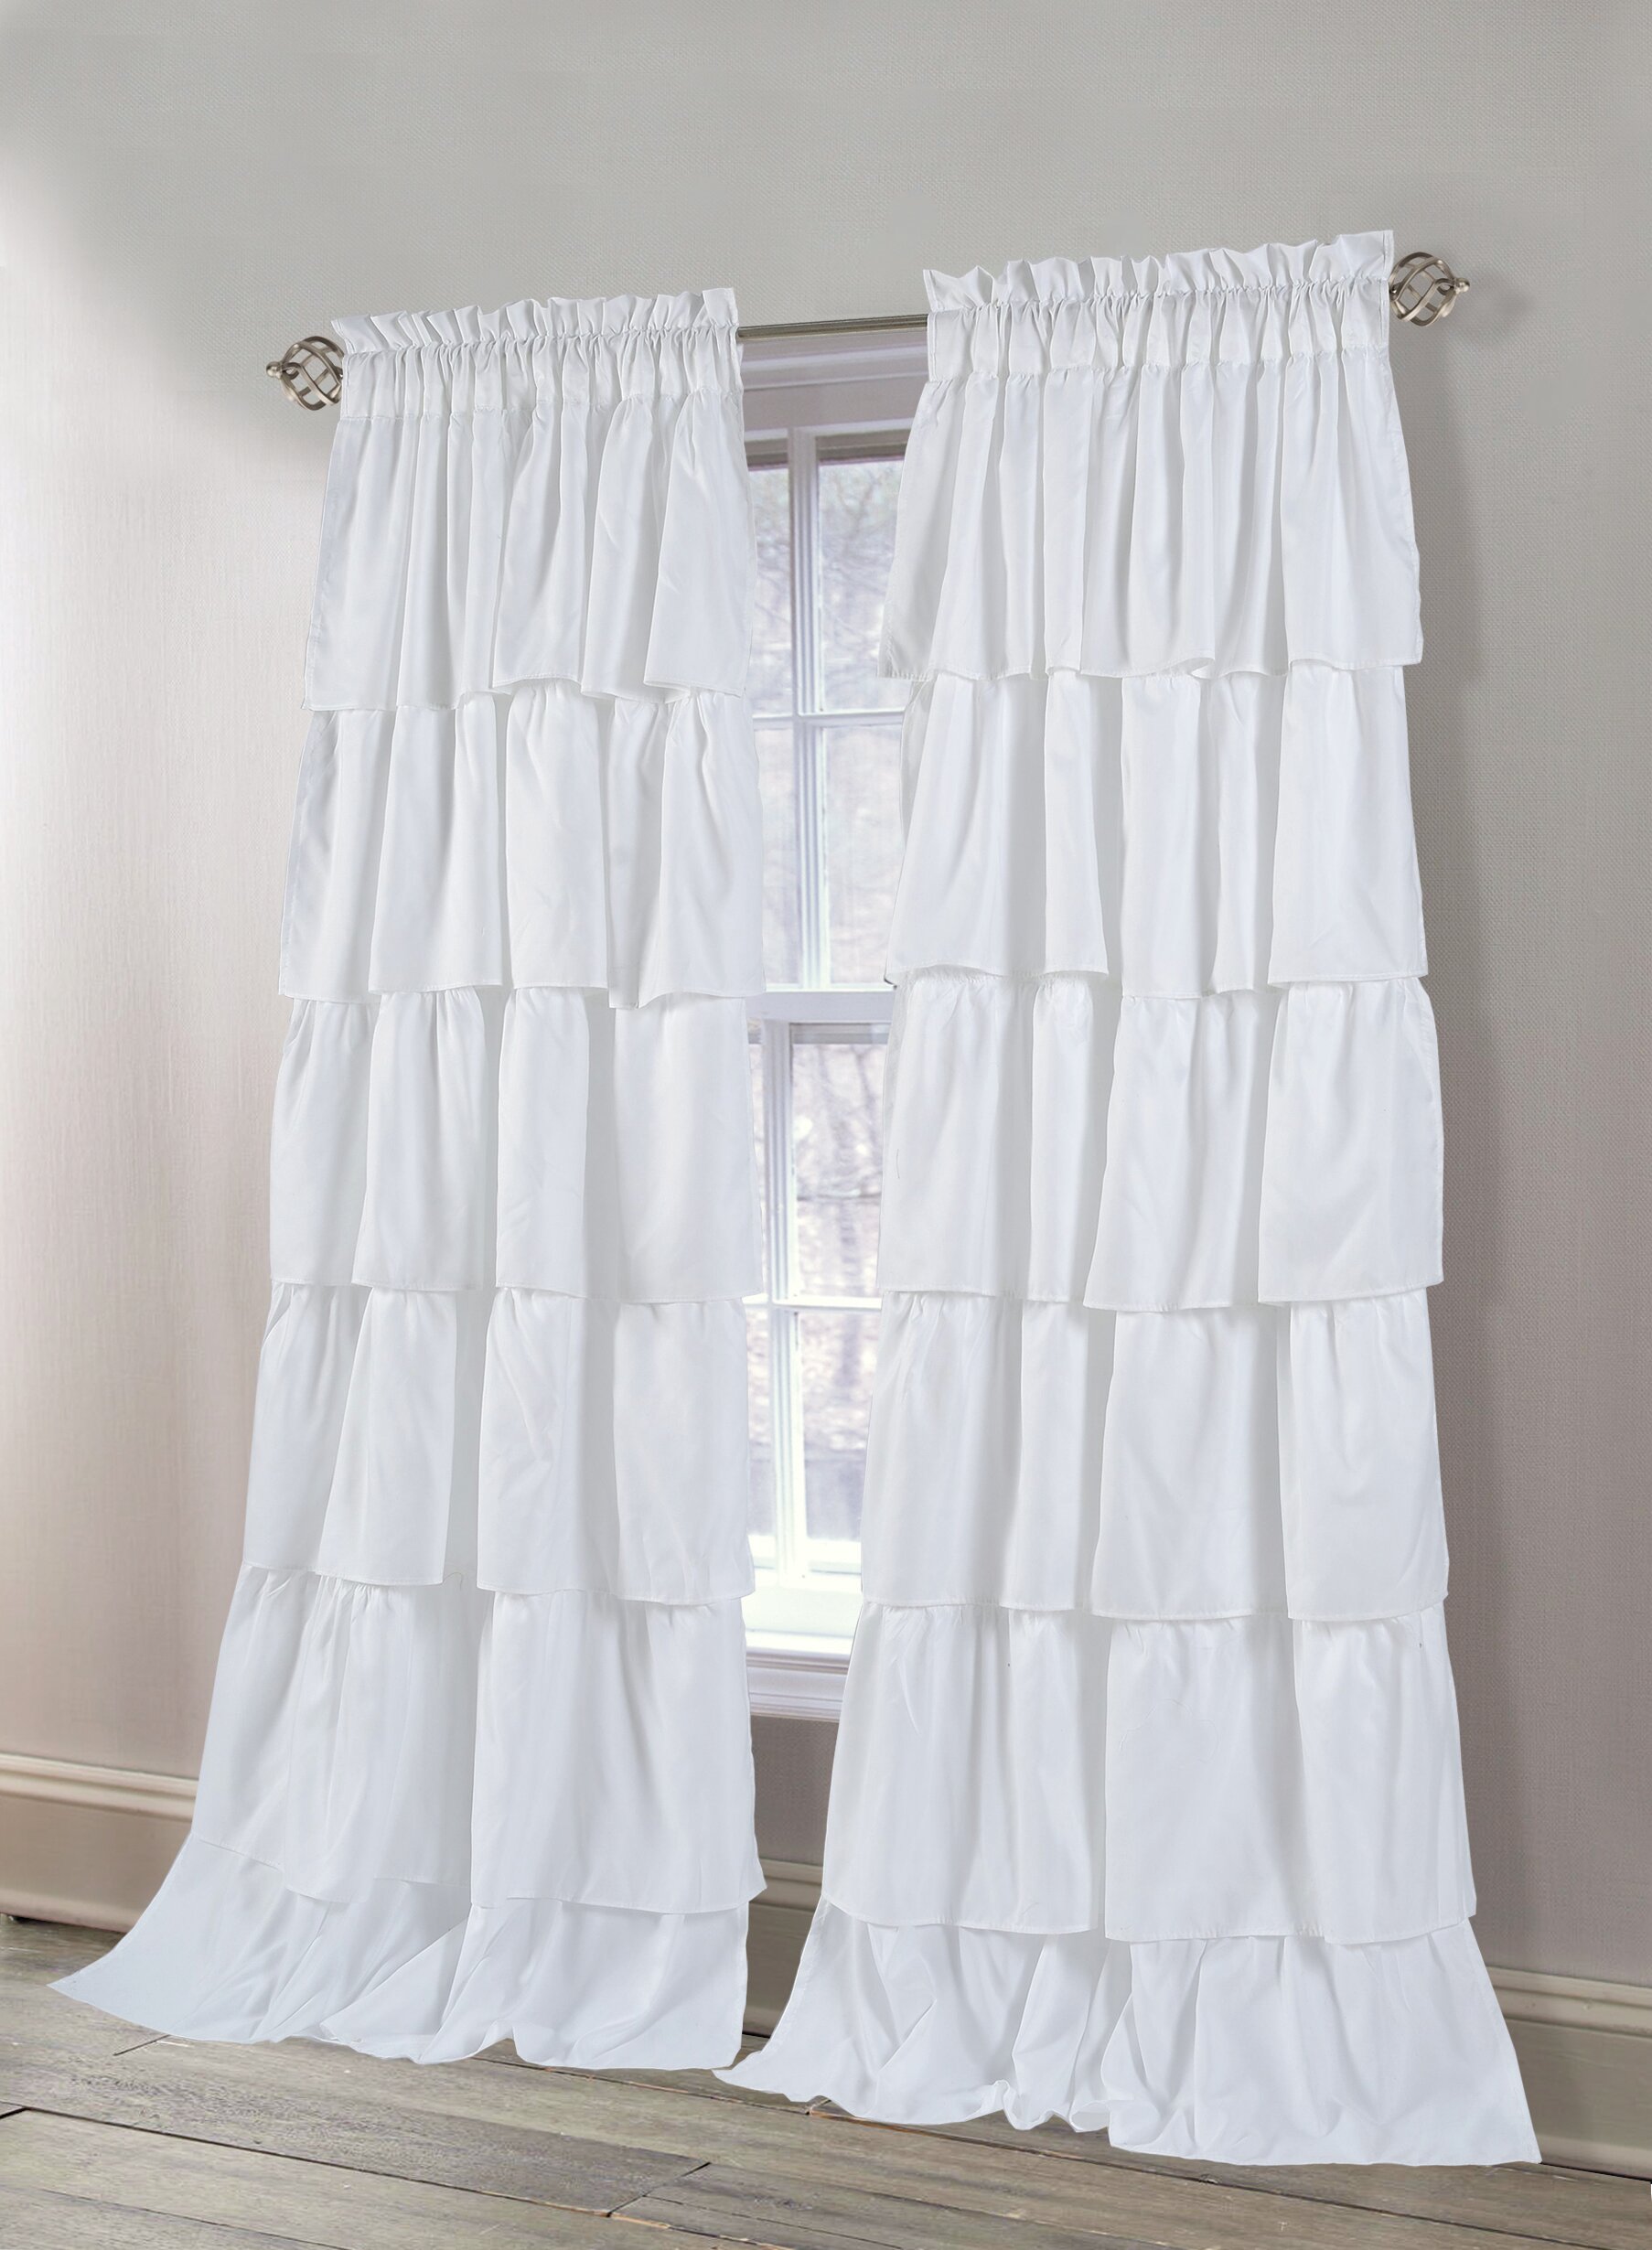 Multi Ruffle Door & Windows Curtains Top Rod Pocket All sizes & colors 2 panel 